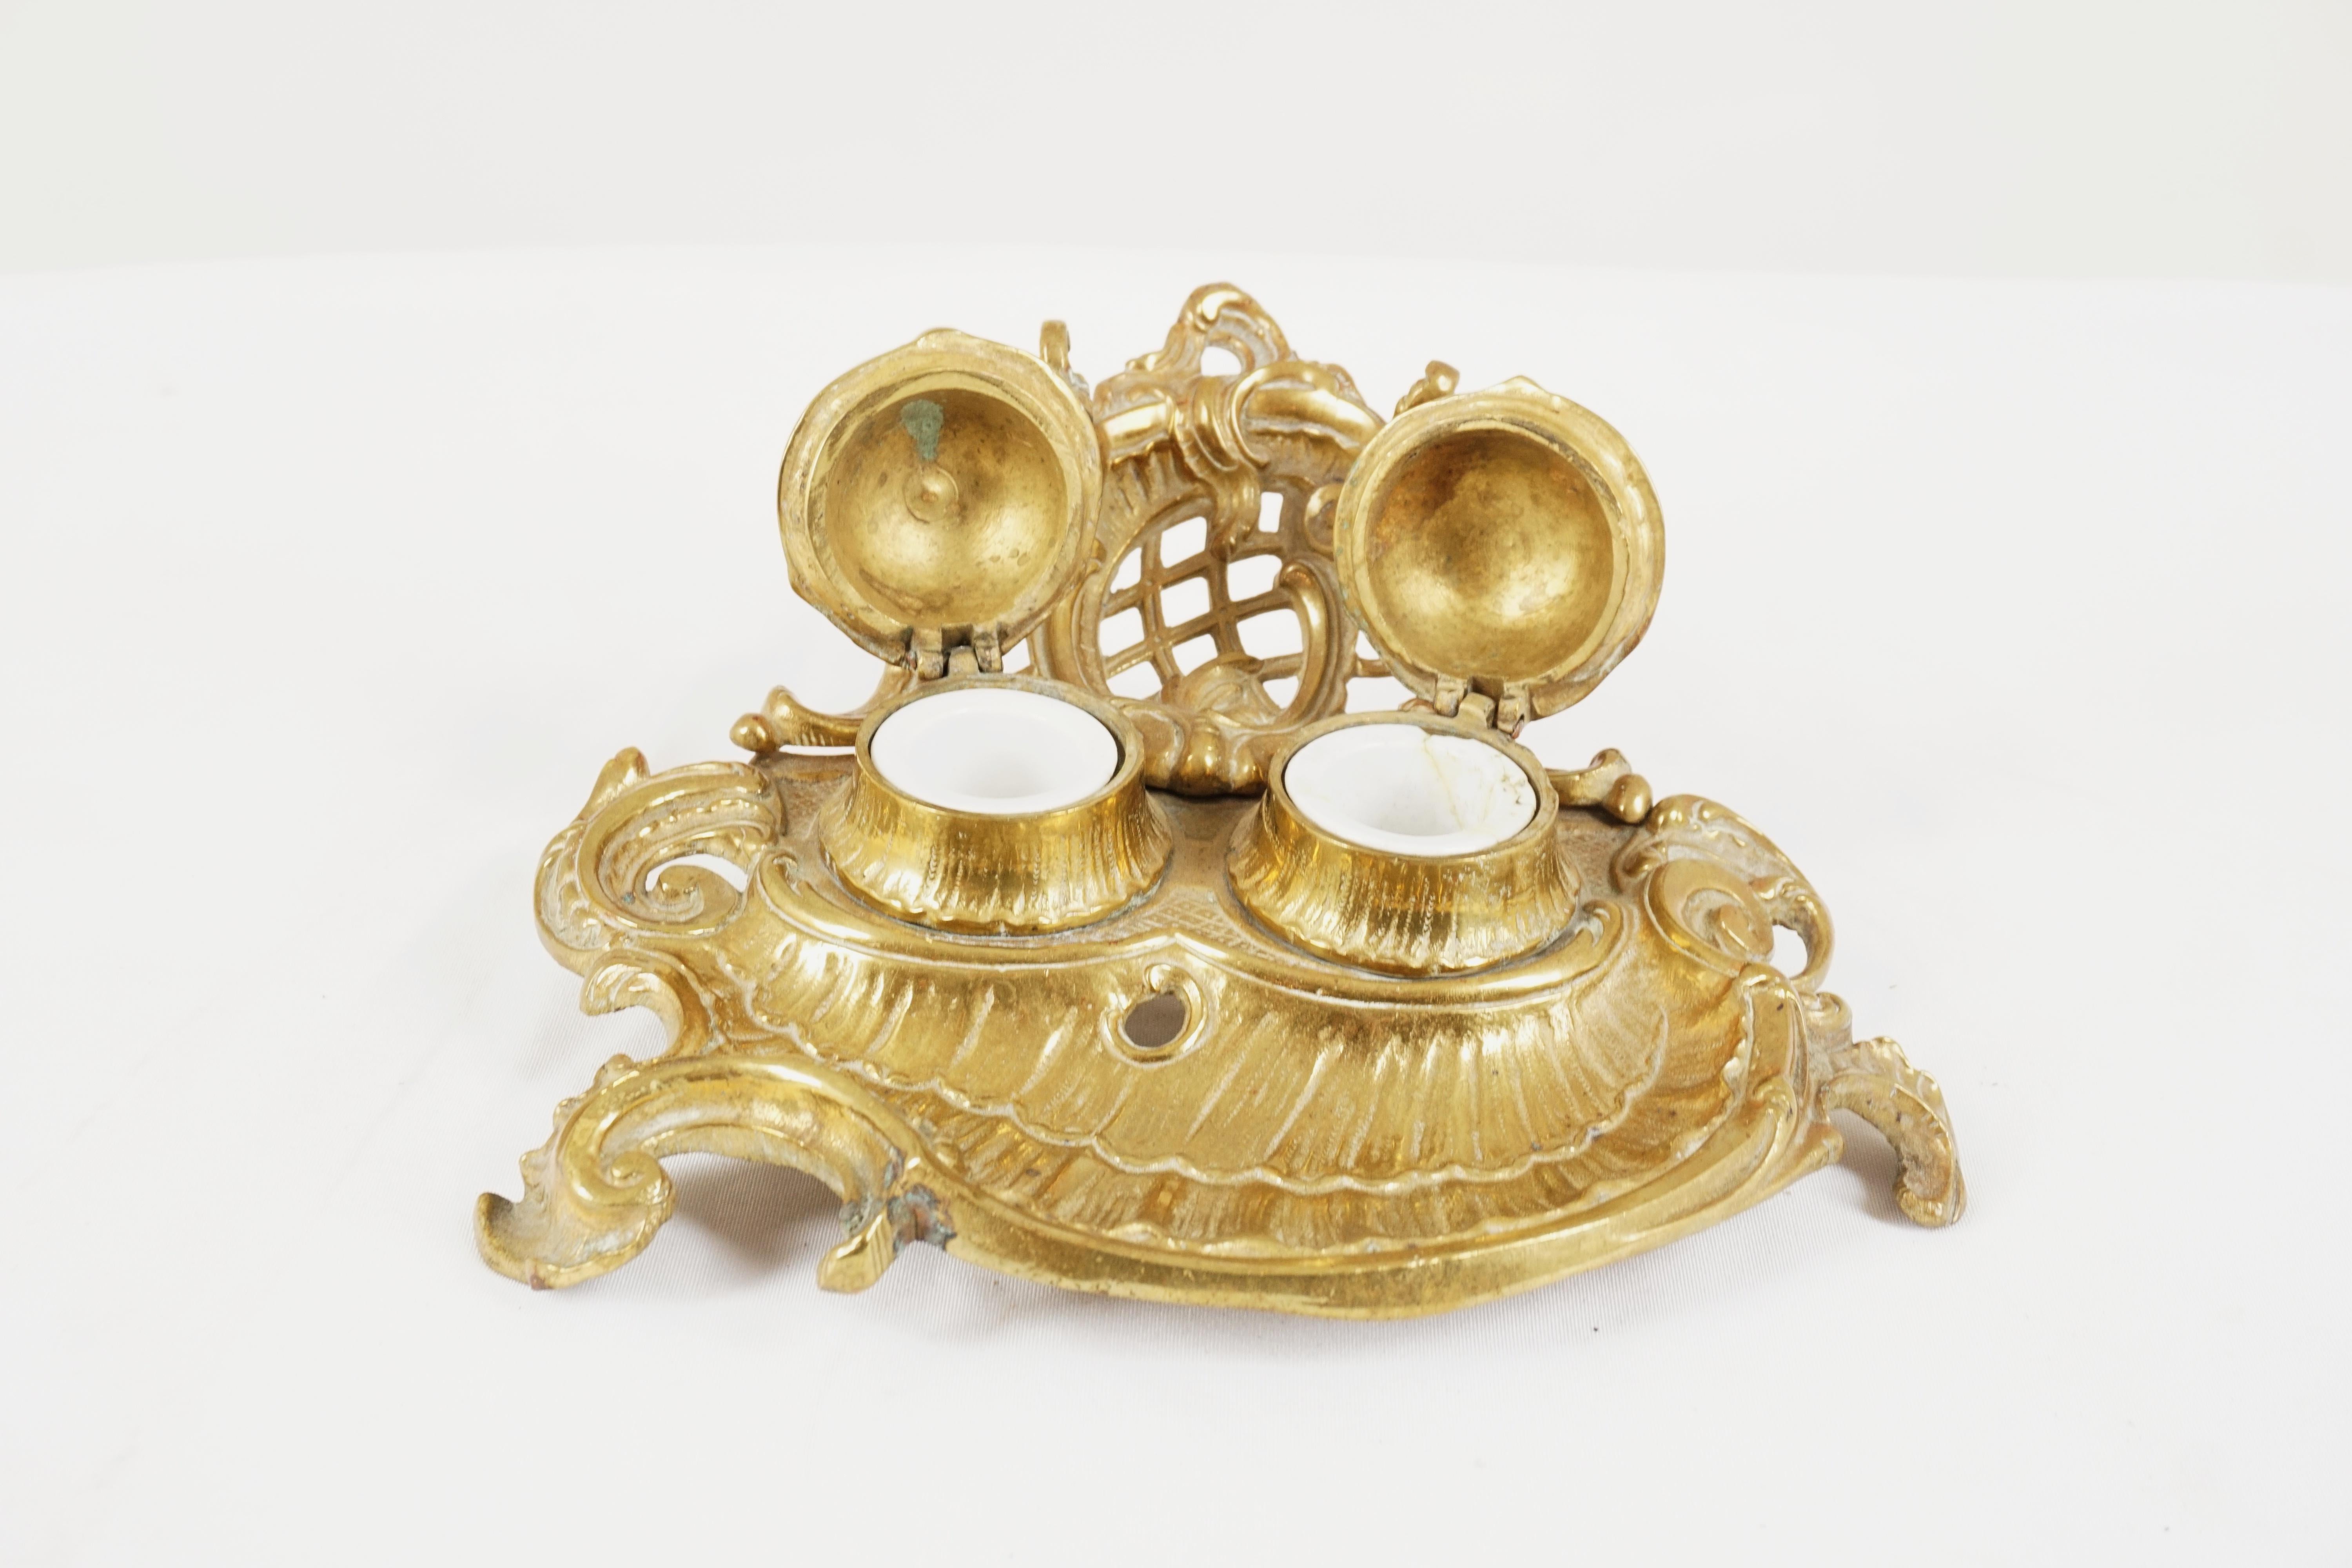 Antique Art Nouveau Gilt Bronze & Brose Double Inkstand, Scotland 1910, H547 In Good Condition For Sale In Vancouver, BC